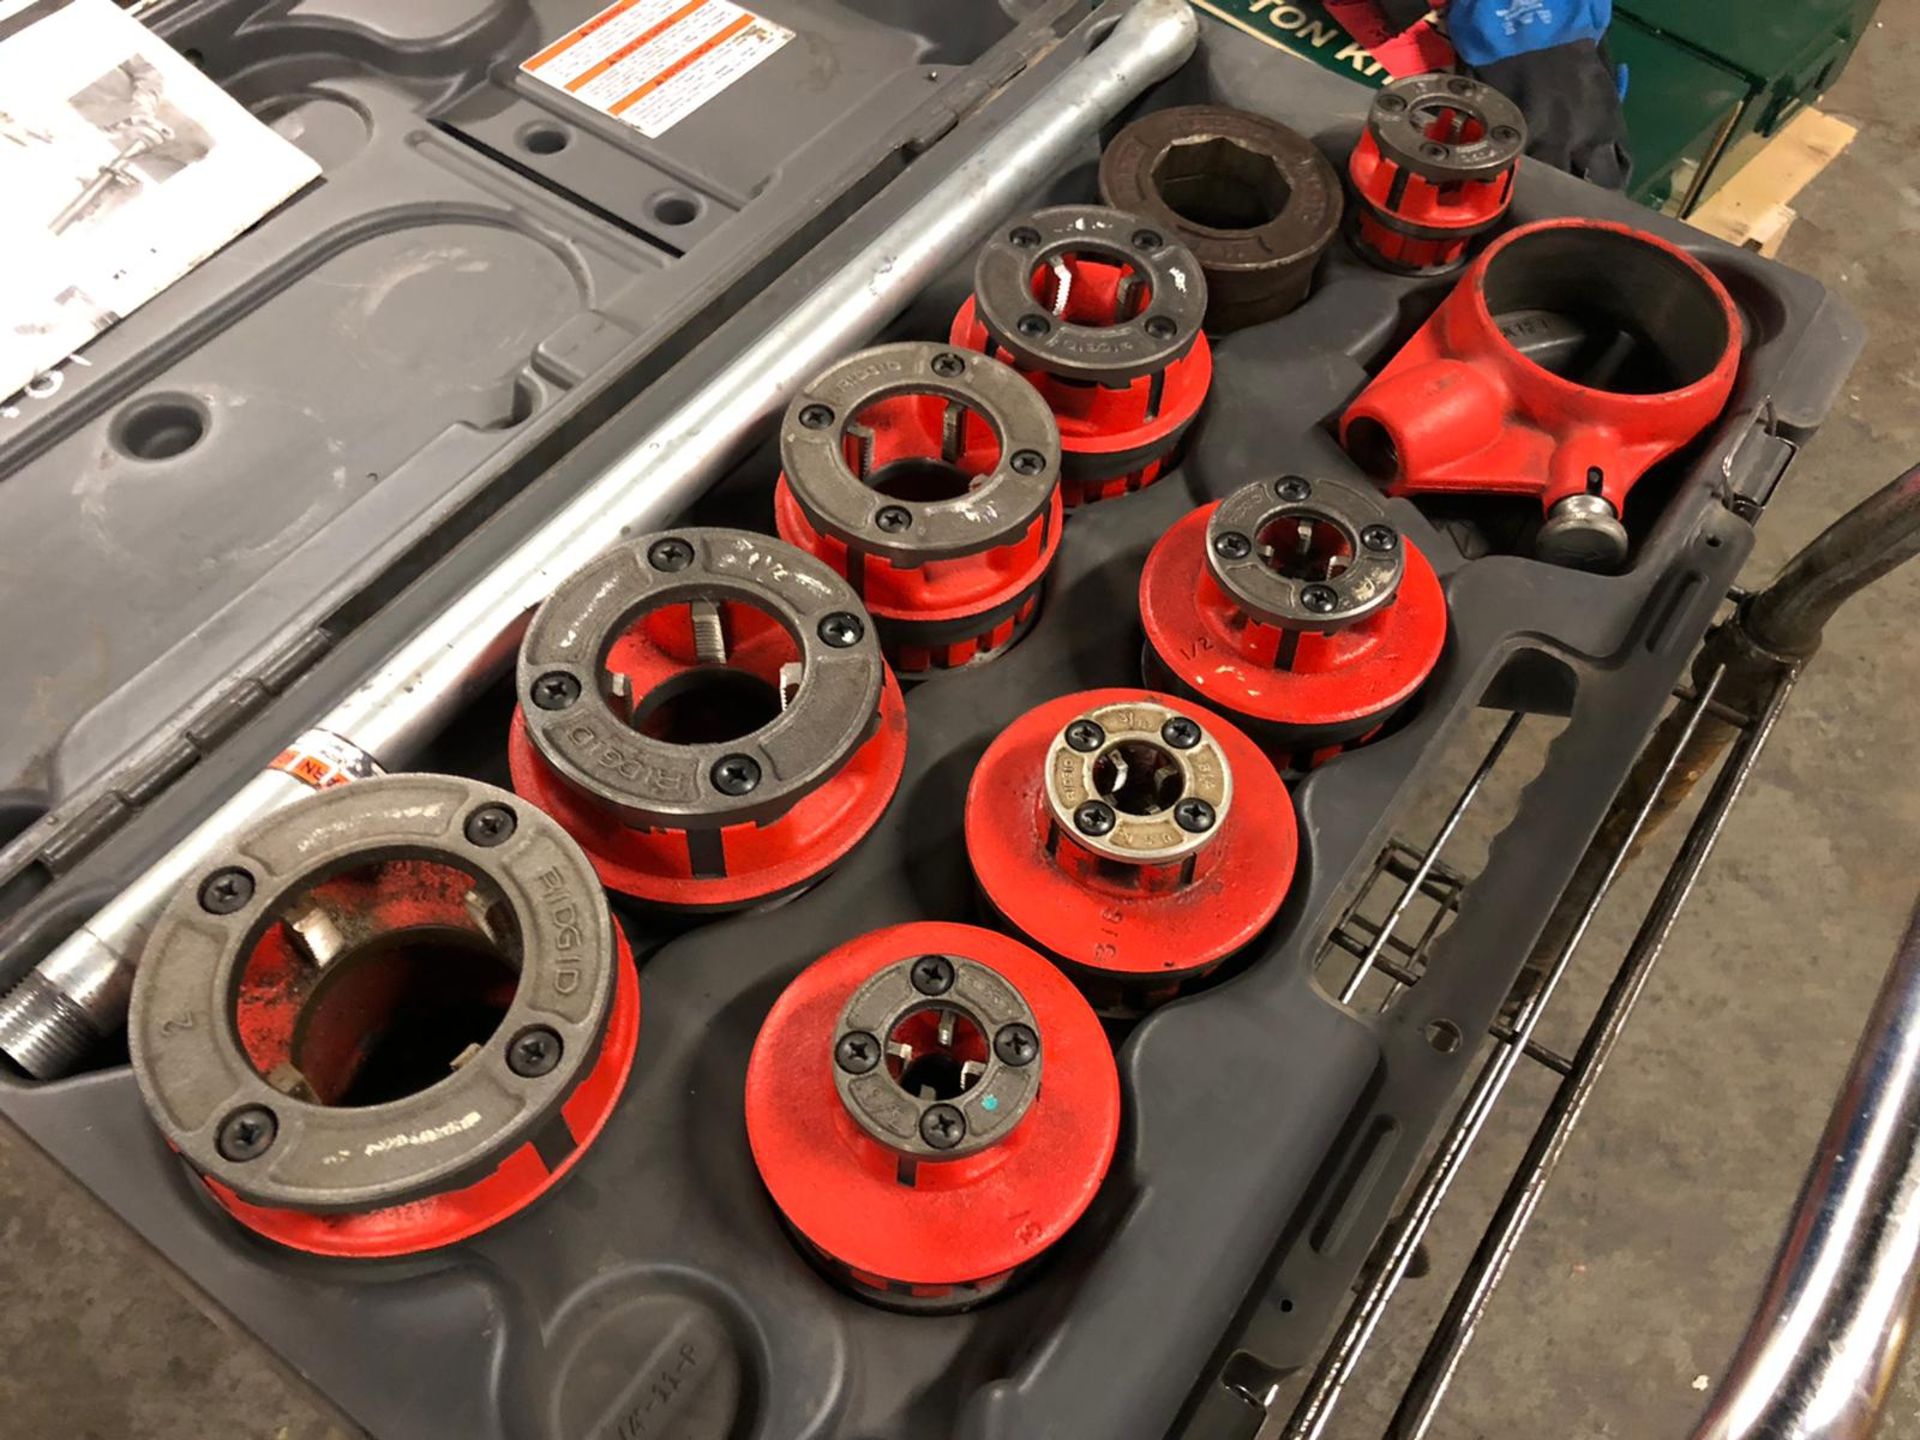 Ridgid Pipe Threading Set with 9 Dies complete in case - Image 3 of 3